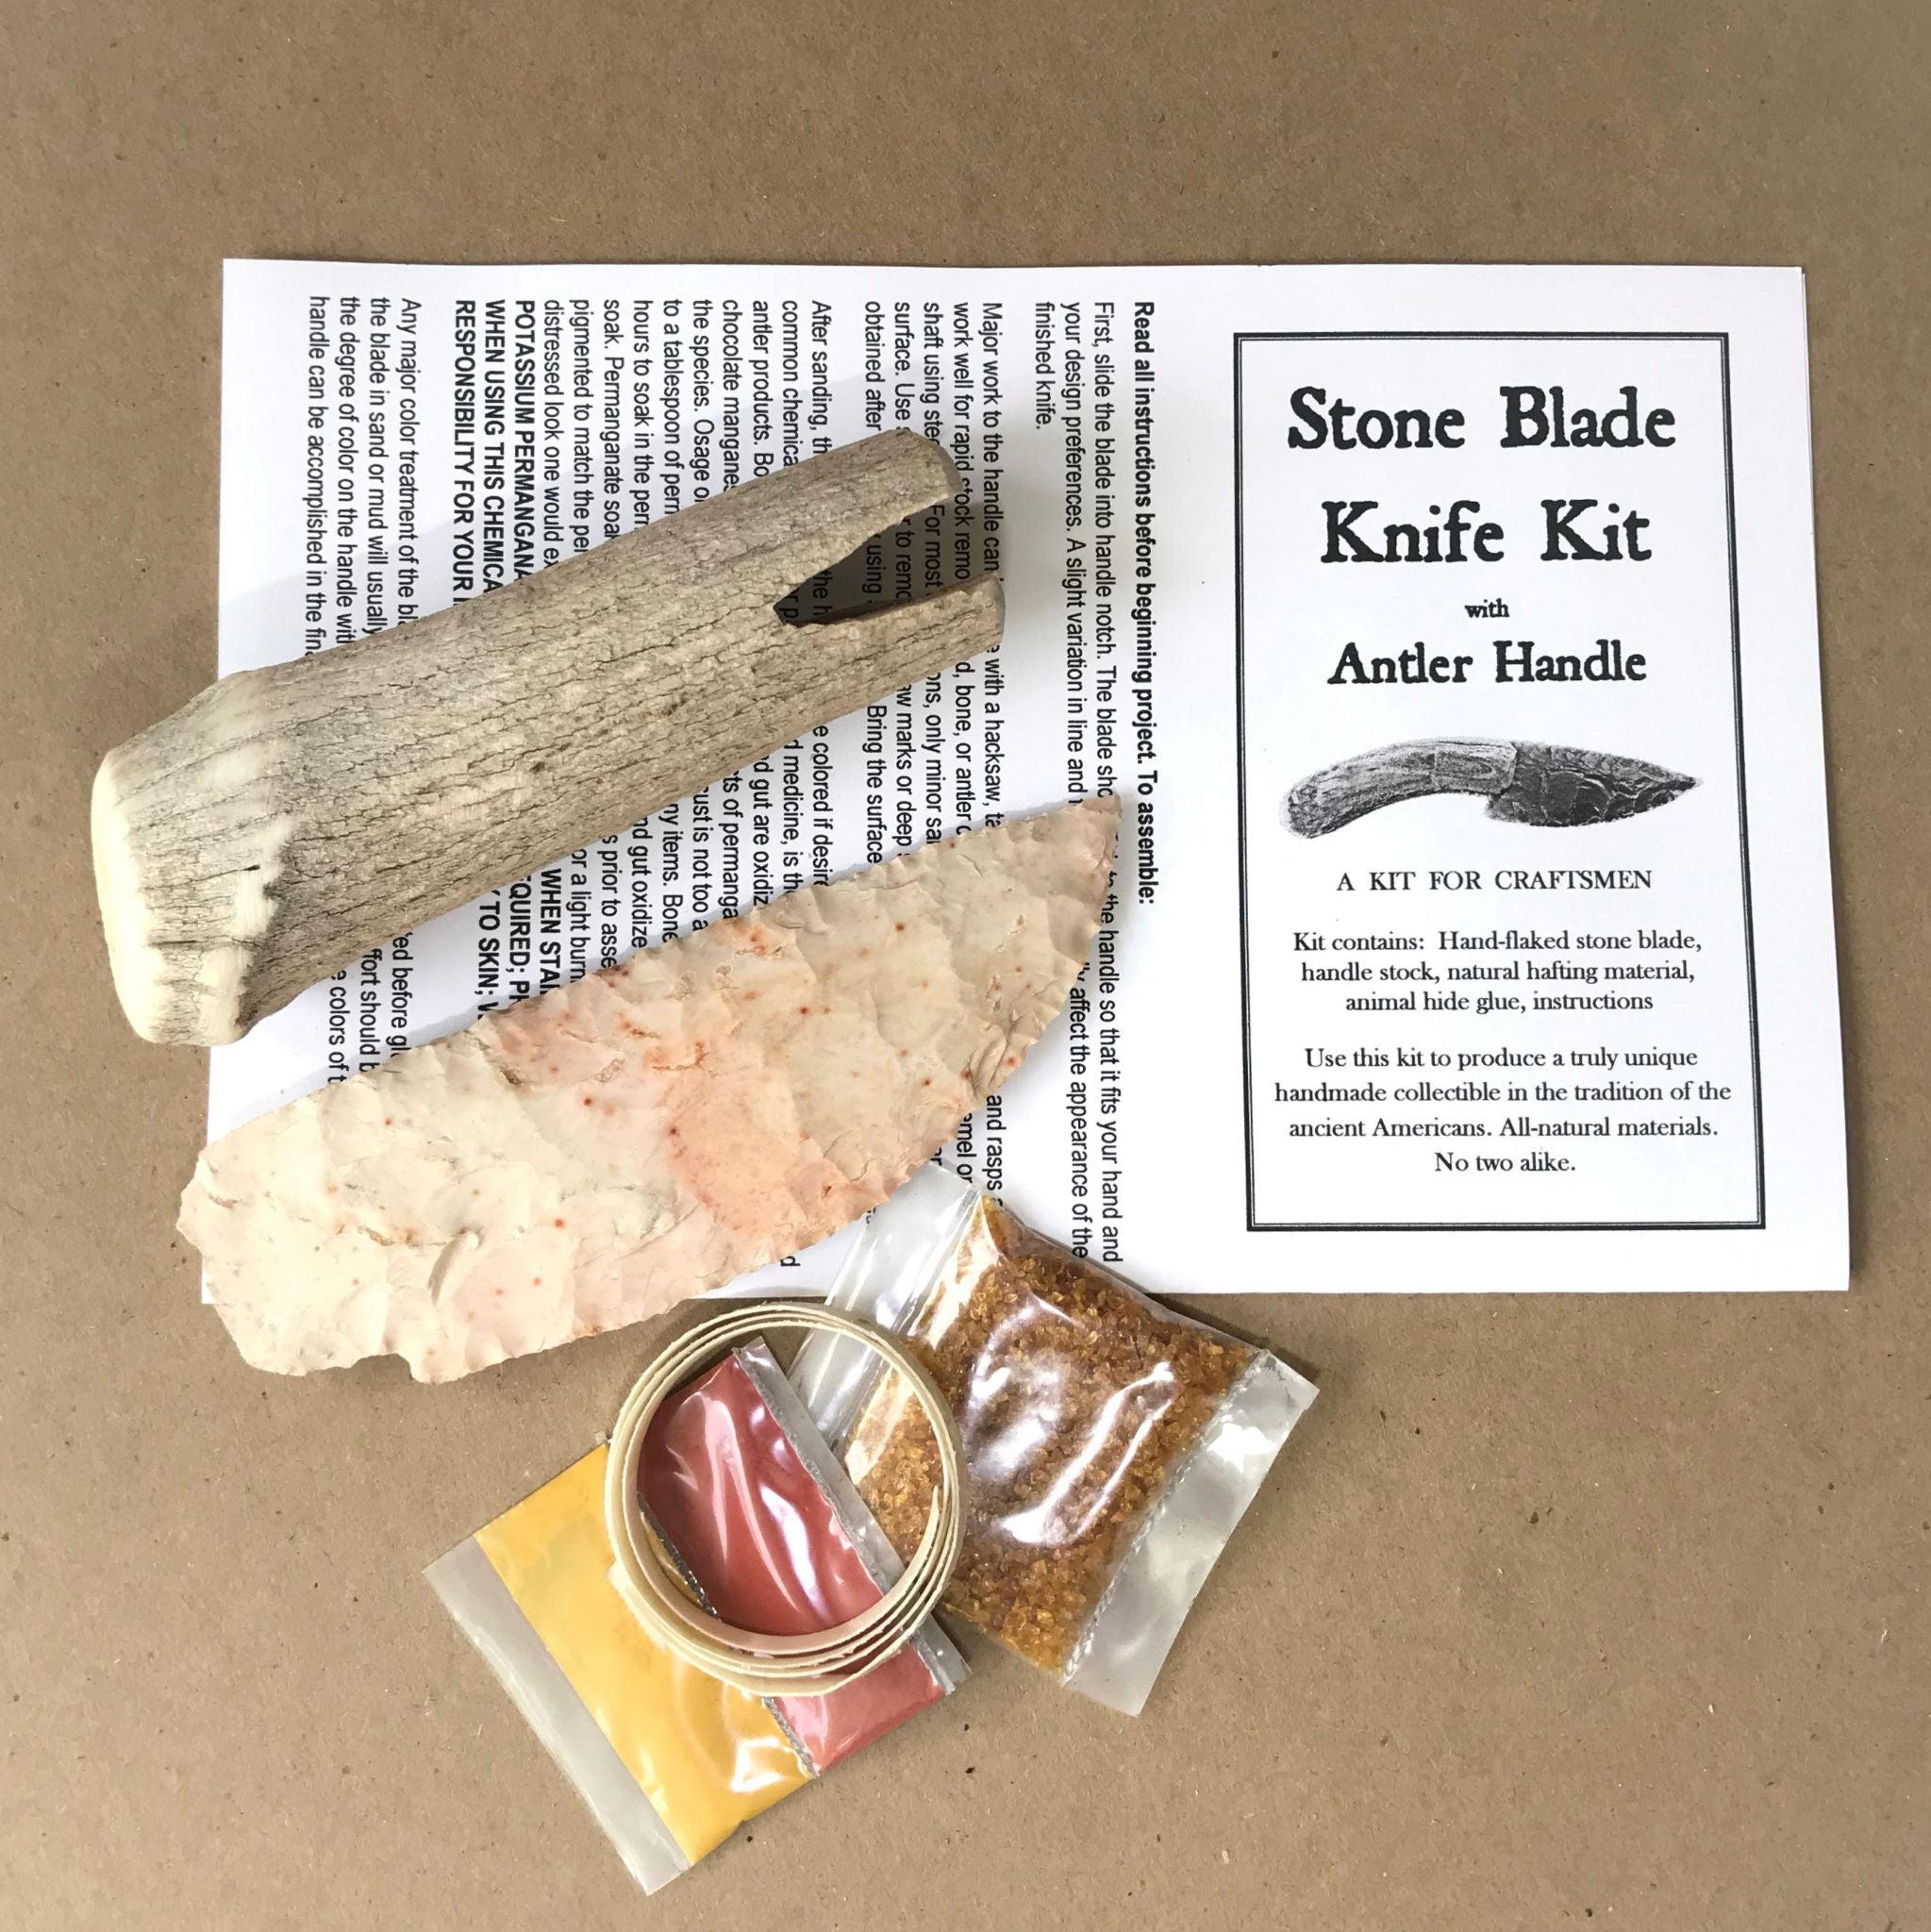 Knapped deluxe stone antler knife kit with kit contents